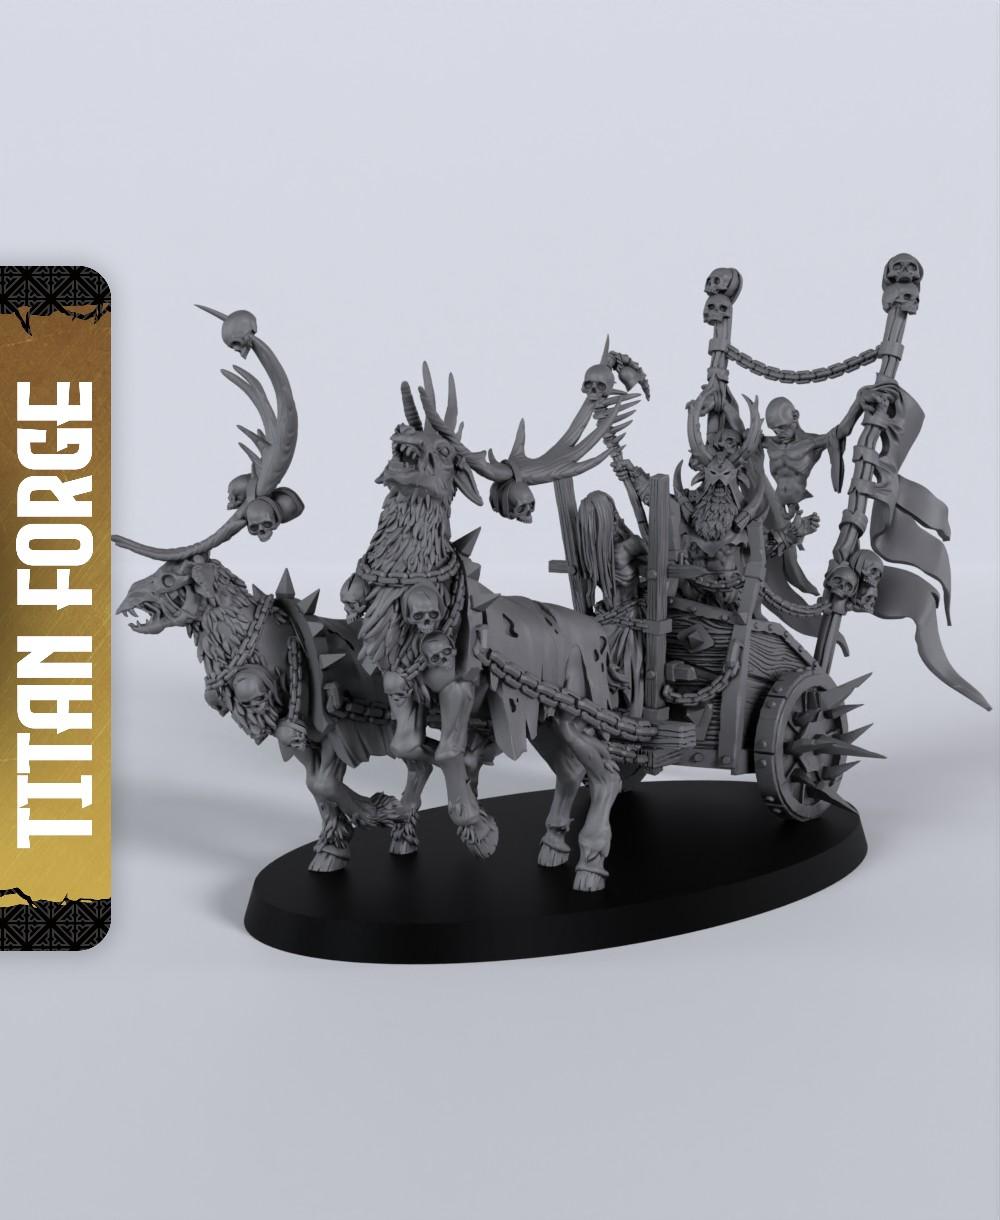 Warmage with Chariot - With Free Dragon Warhammer - 5e DnD Inspired for RPG and Wargamers 3d model